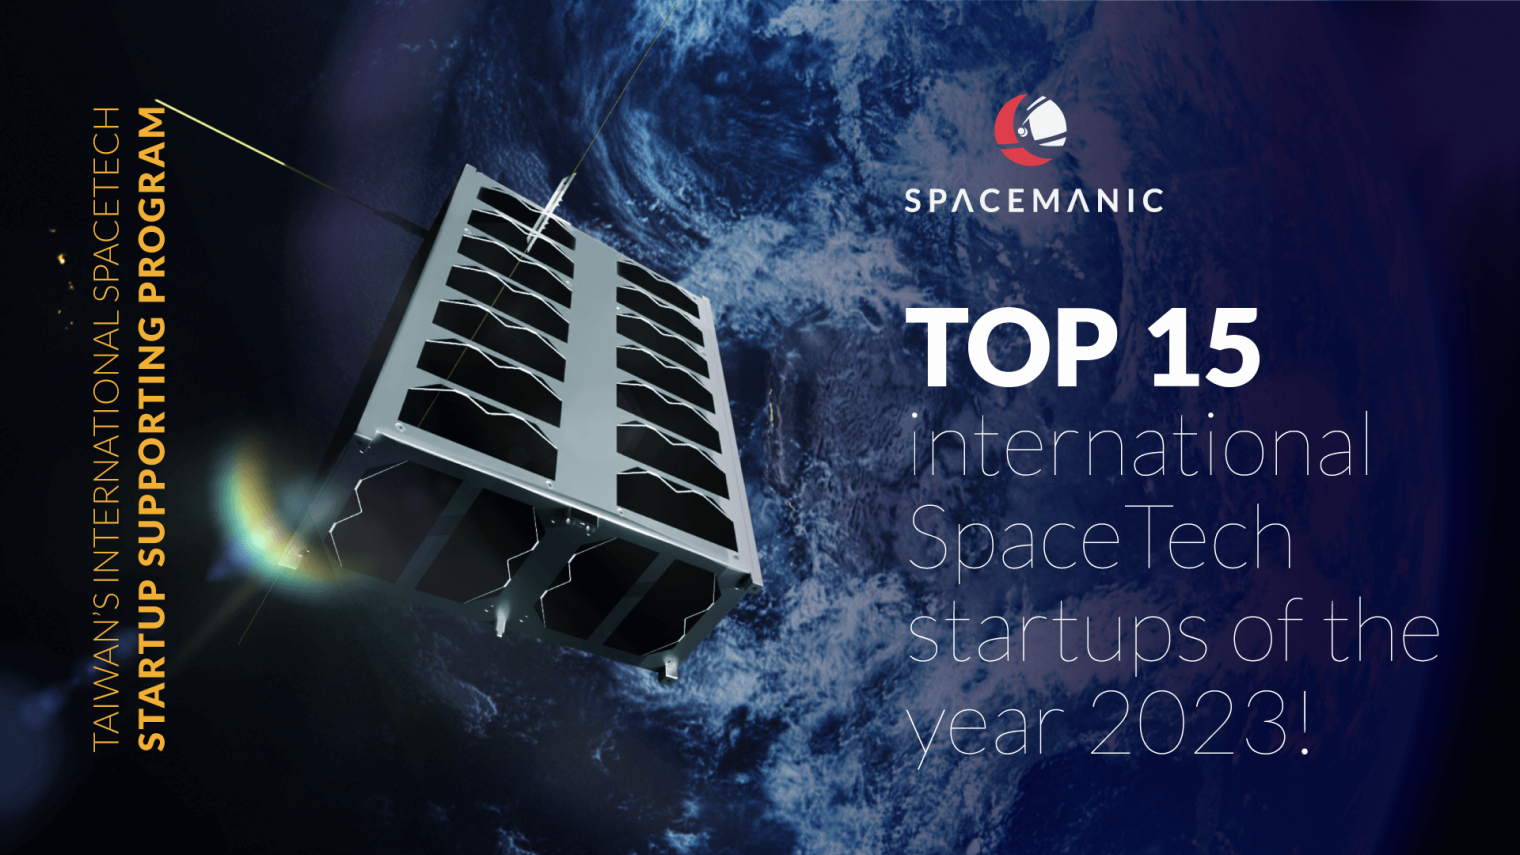 Spacemanic Rockets to Success as Top 15 International SpaceTech Startup of 2023